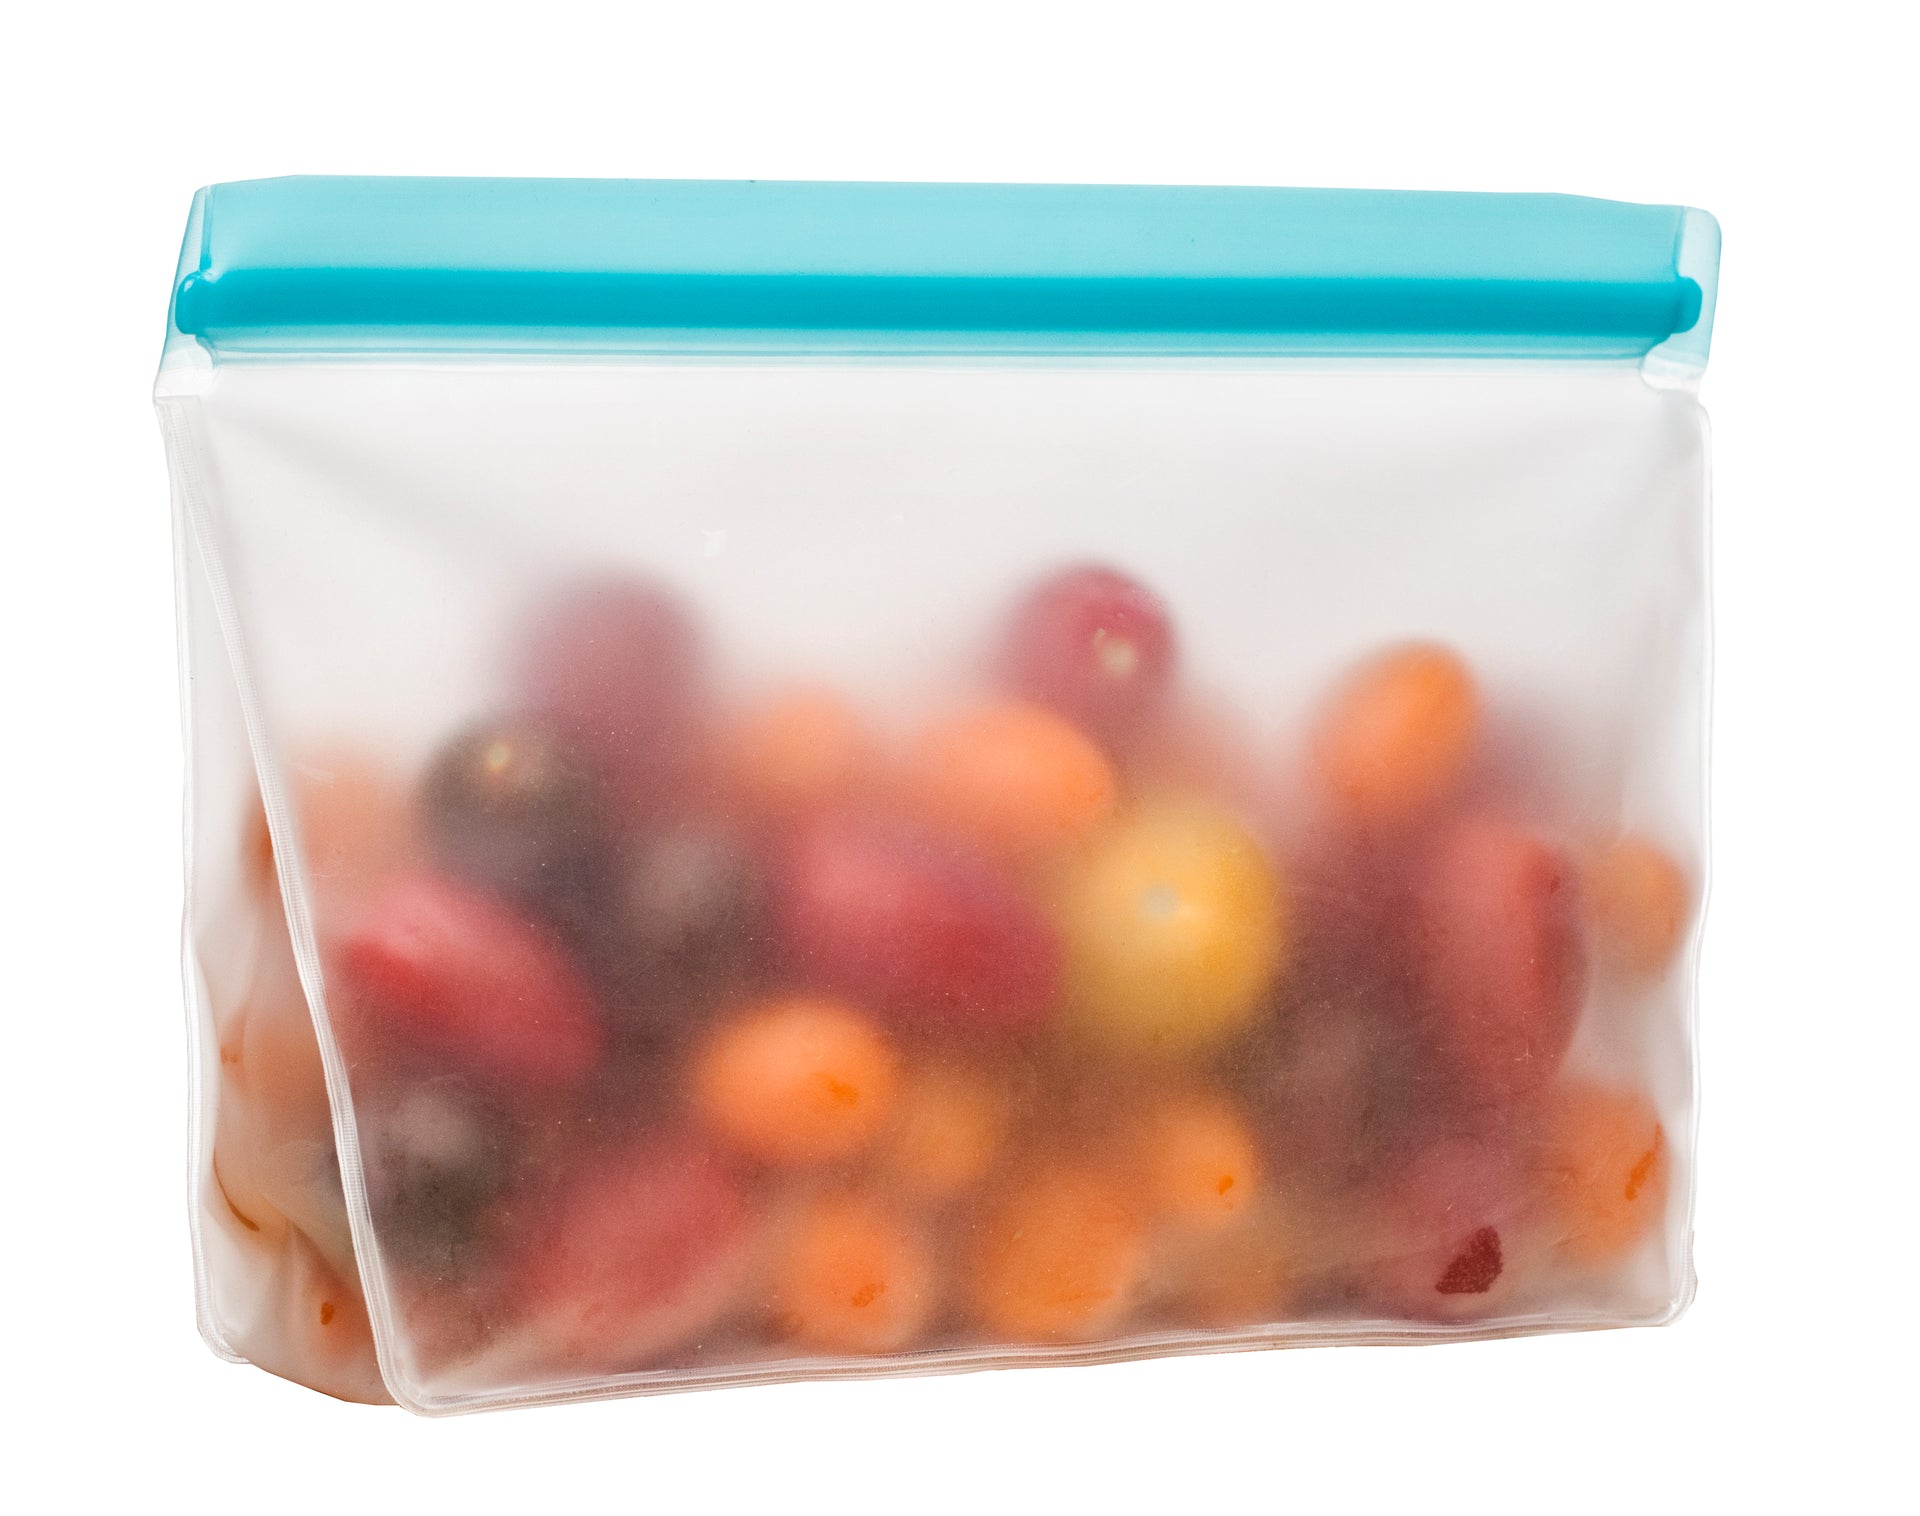 (re)zip Reusable Leak-proof Food Storage Stand-Up Bag Kit - Snack, 2-Cup,  Quart - Clear - 3pc